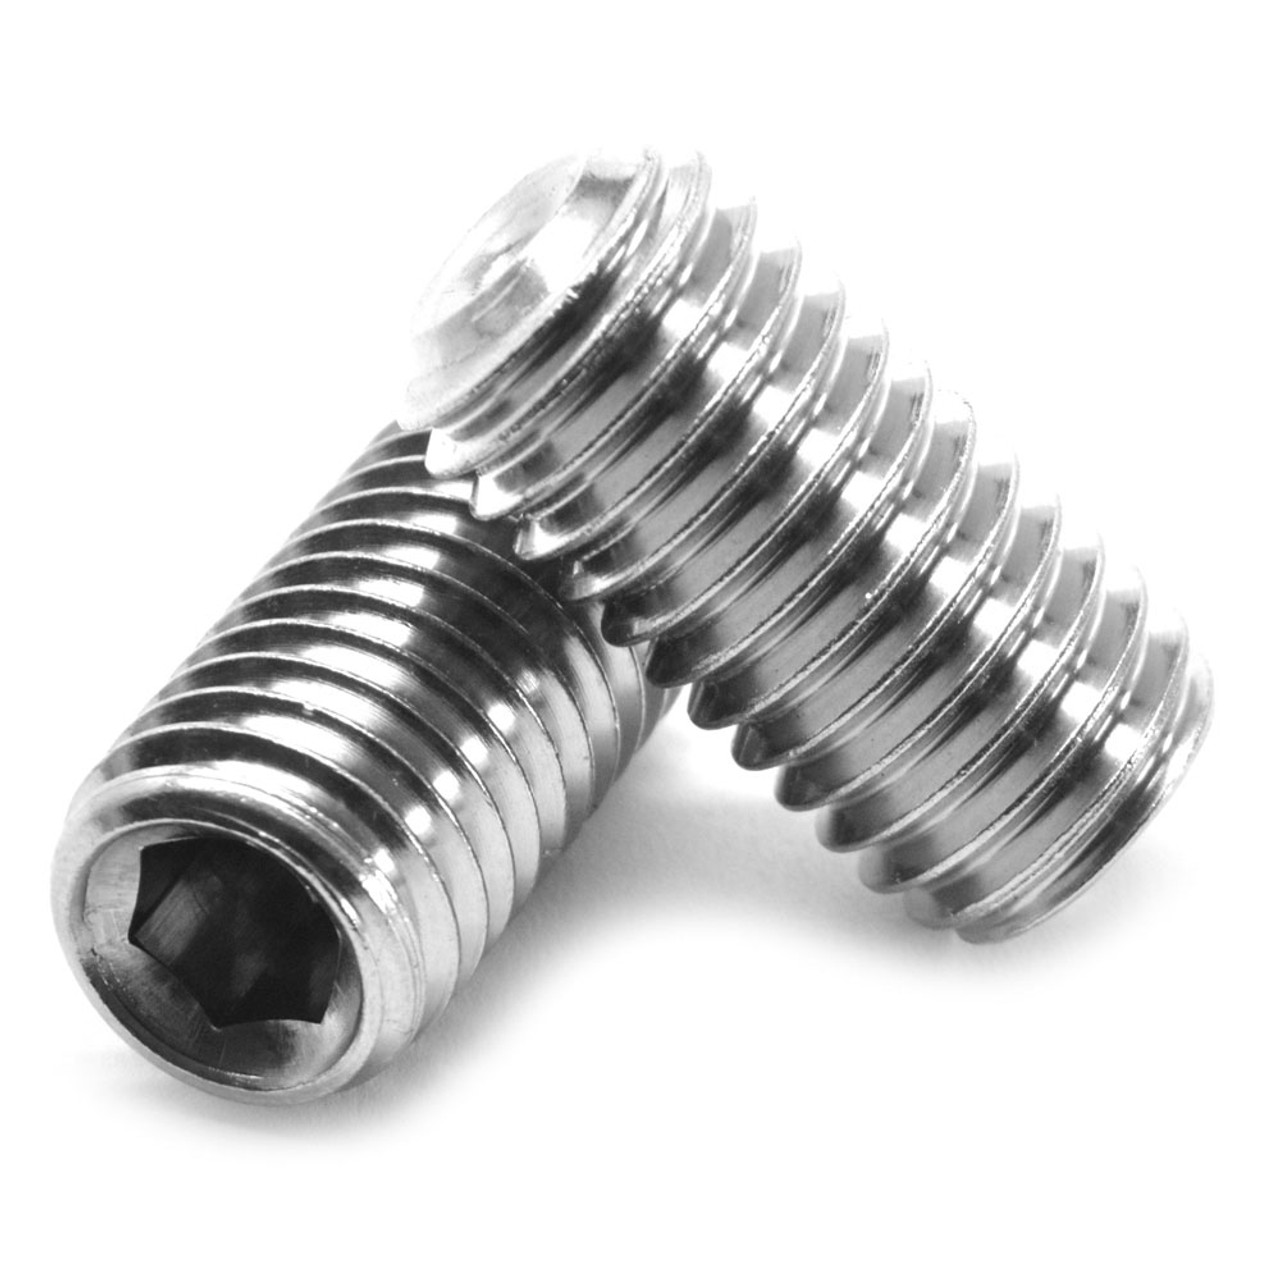 7/16"-14 x 1" Coarse Thread Socket Set Screw Cup Point Stainless Steel 18-8